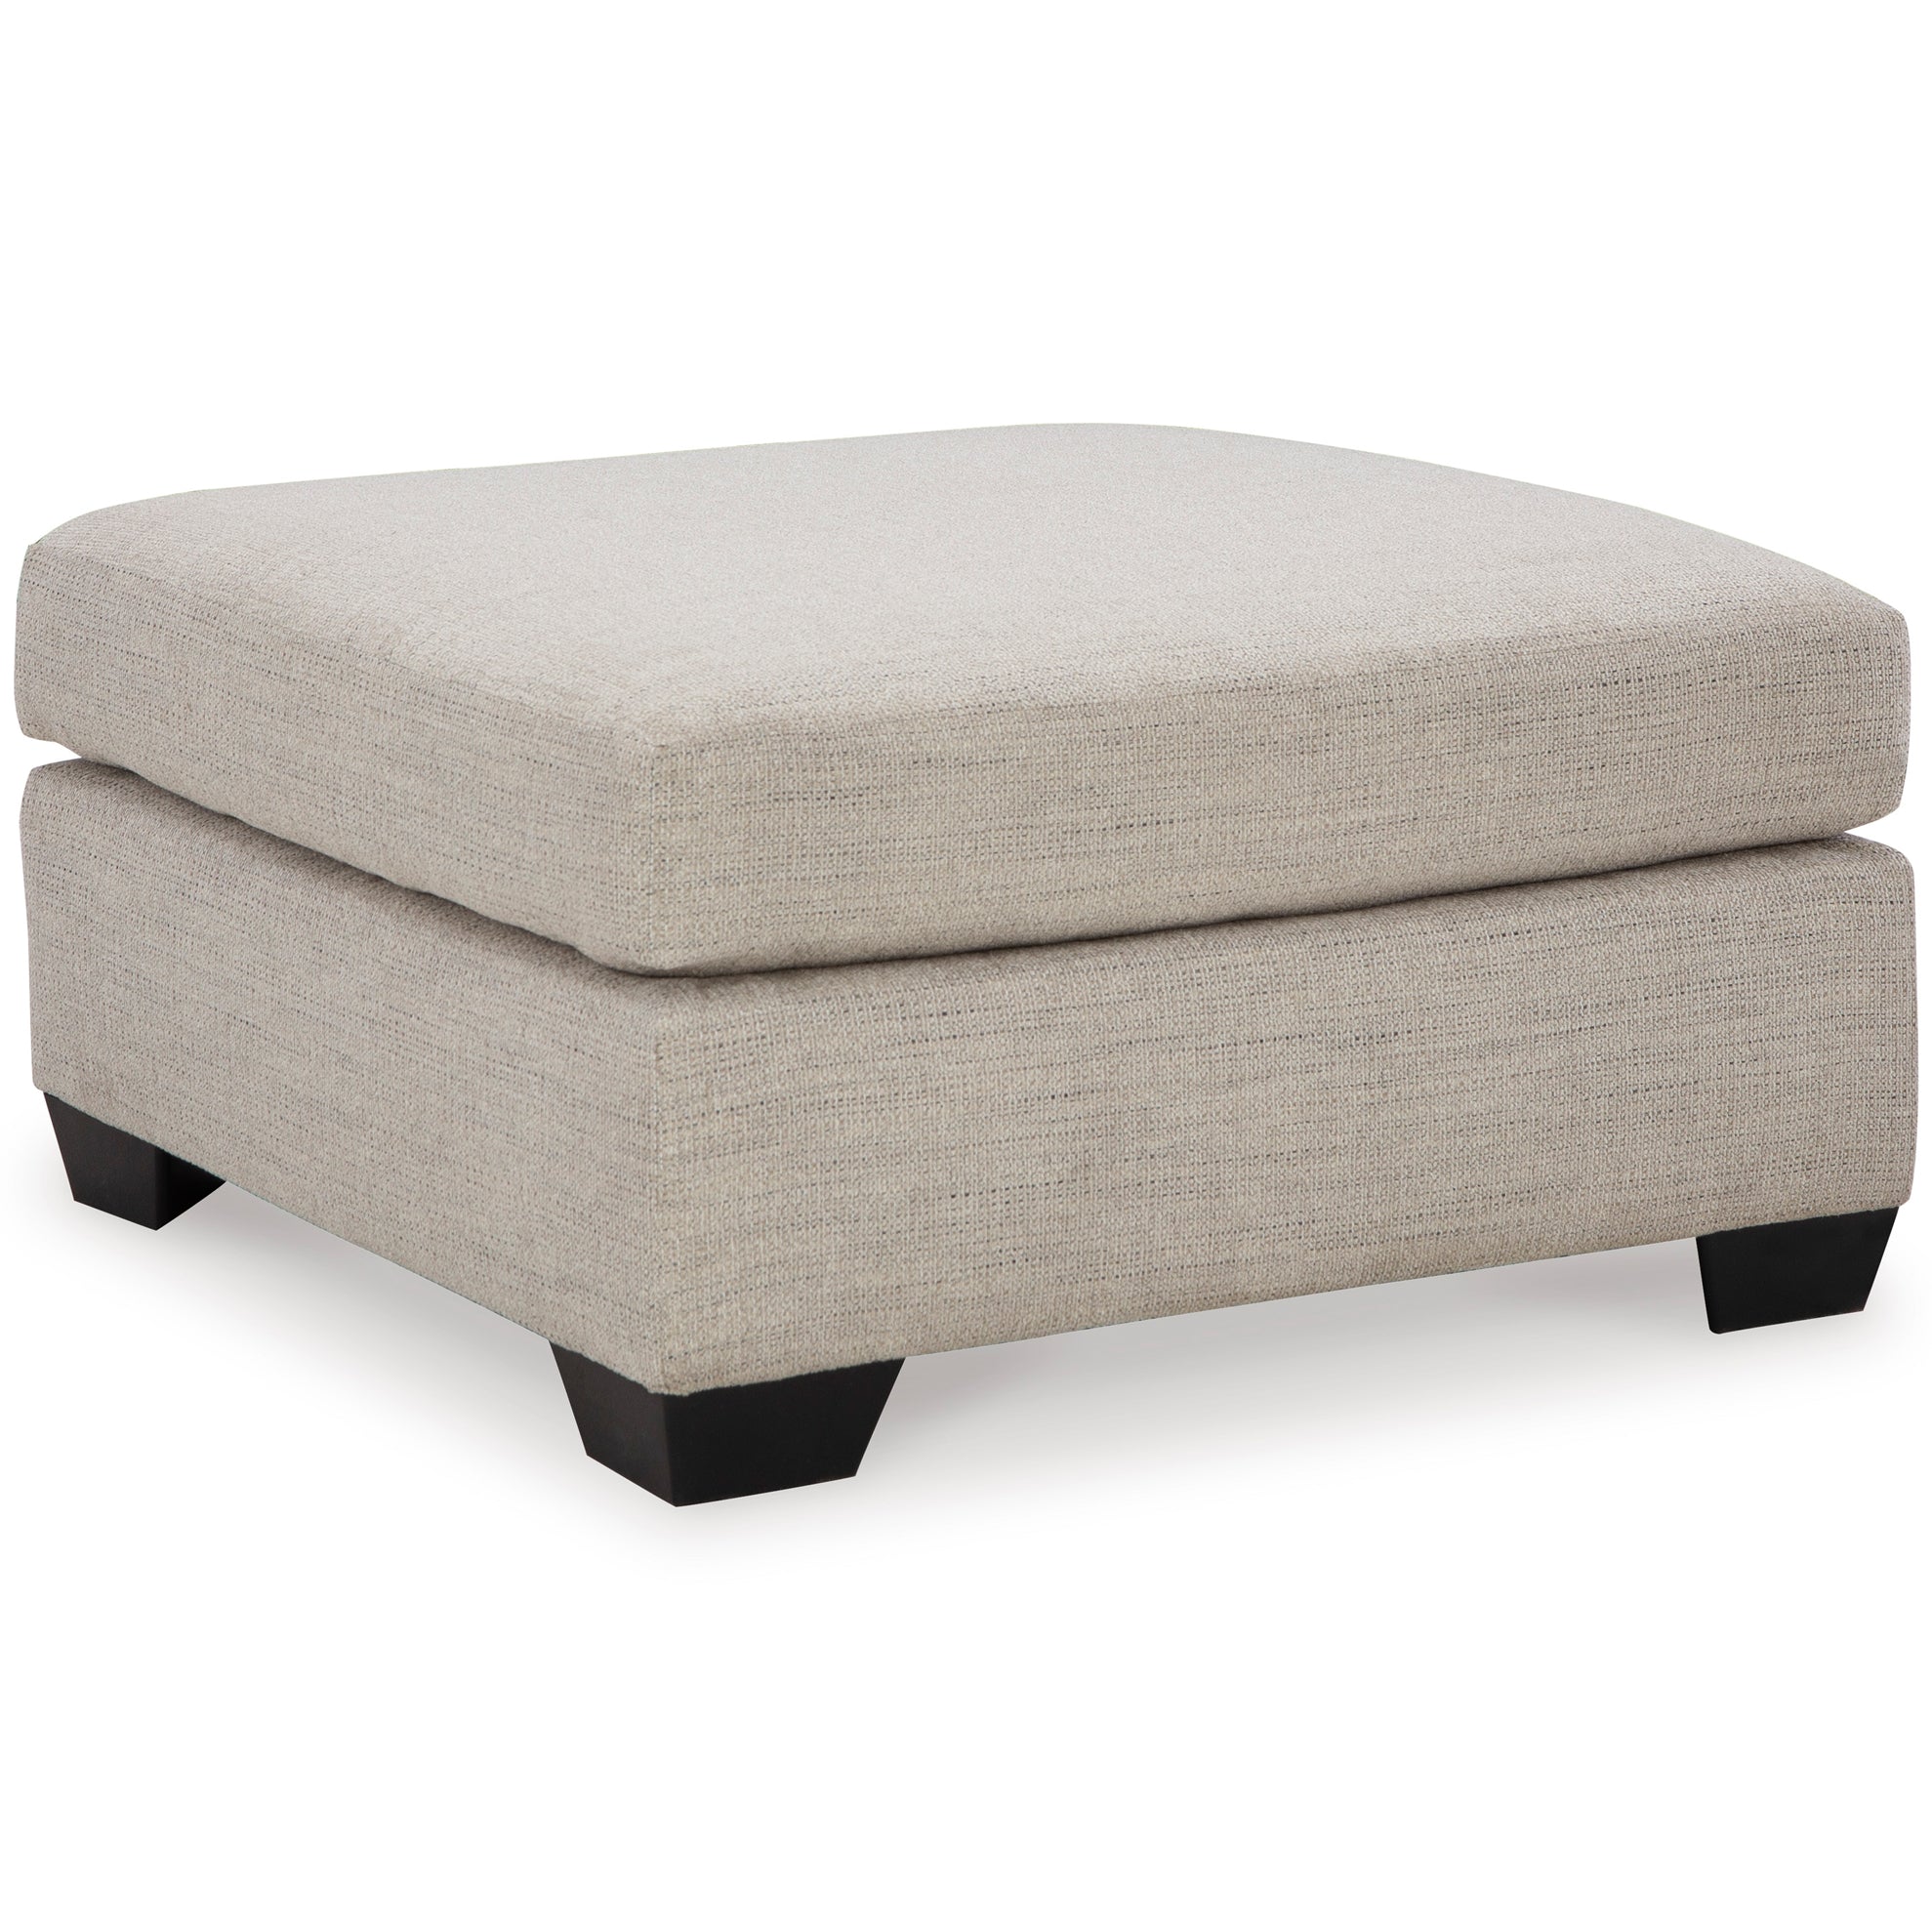 Mahoney Oversized Accent Ottoman in Pebble Color